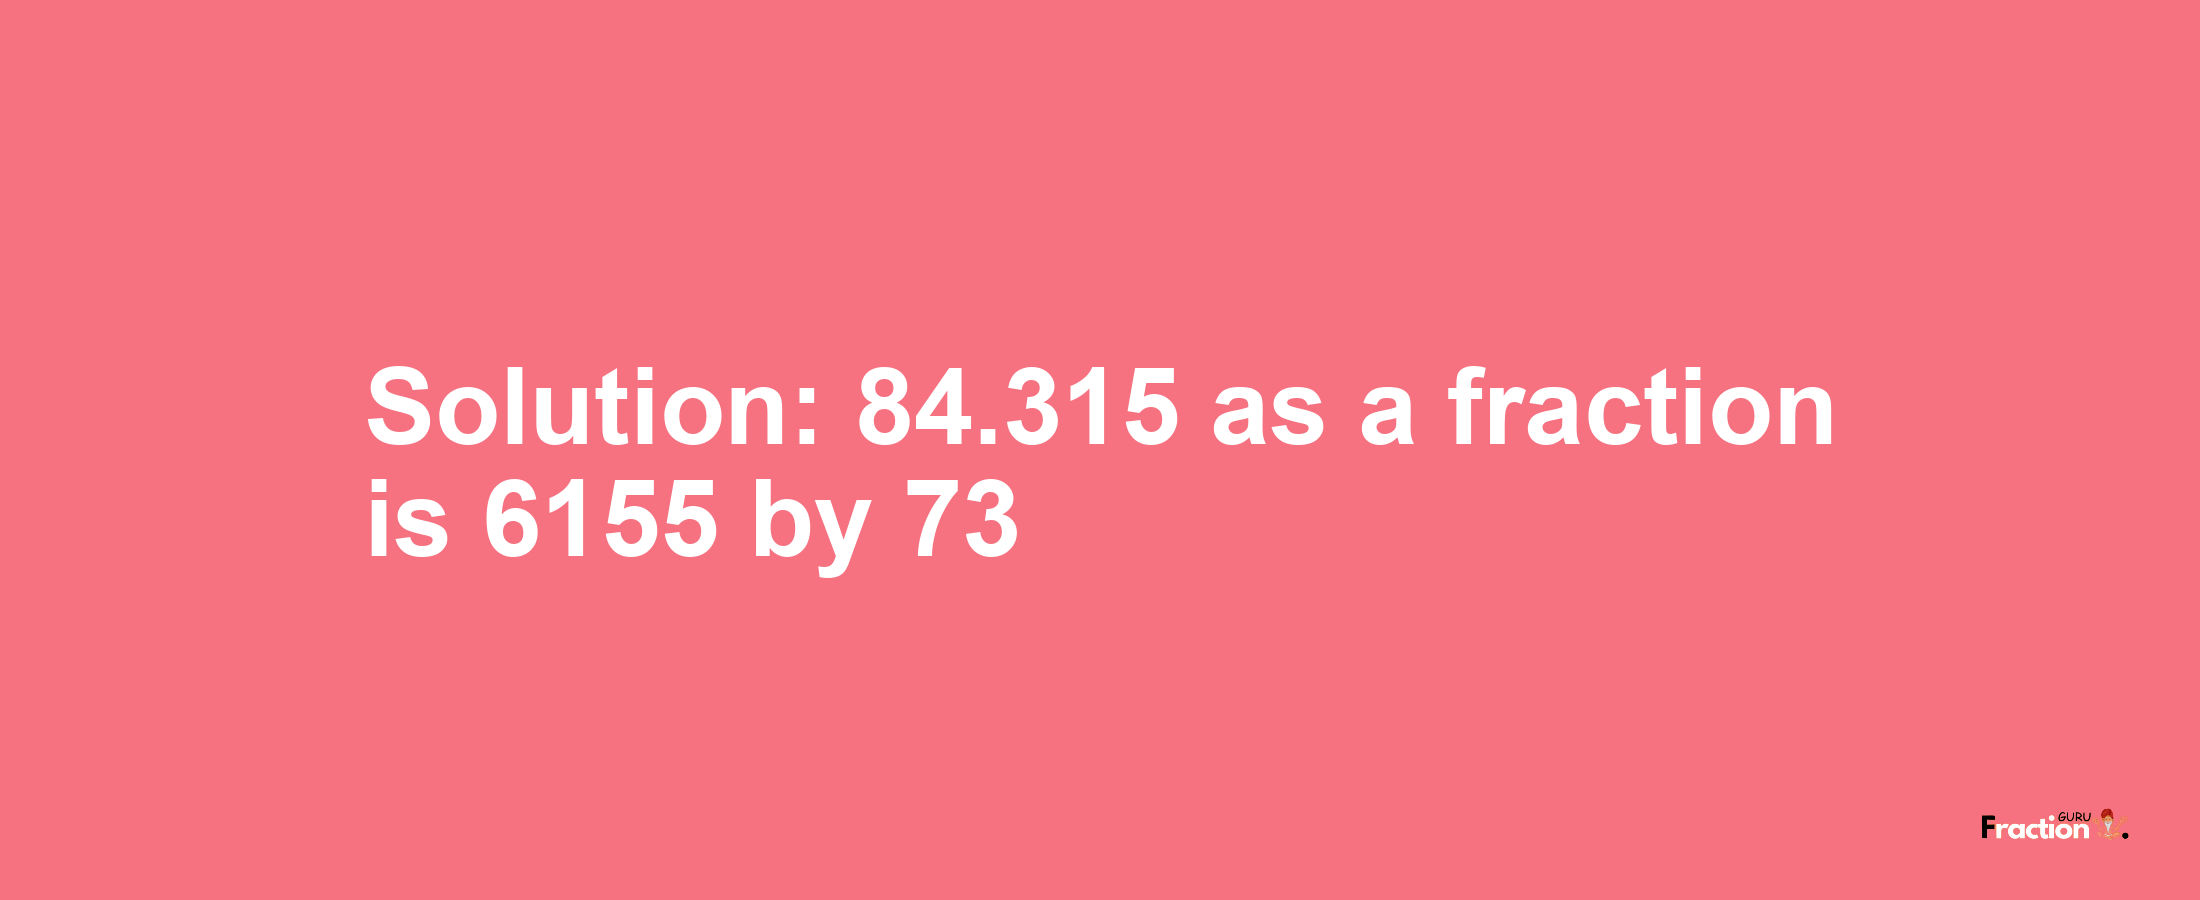 Solution:84.315 as a fraction is 6155/73